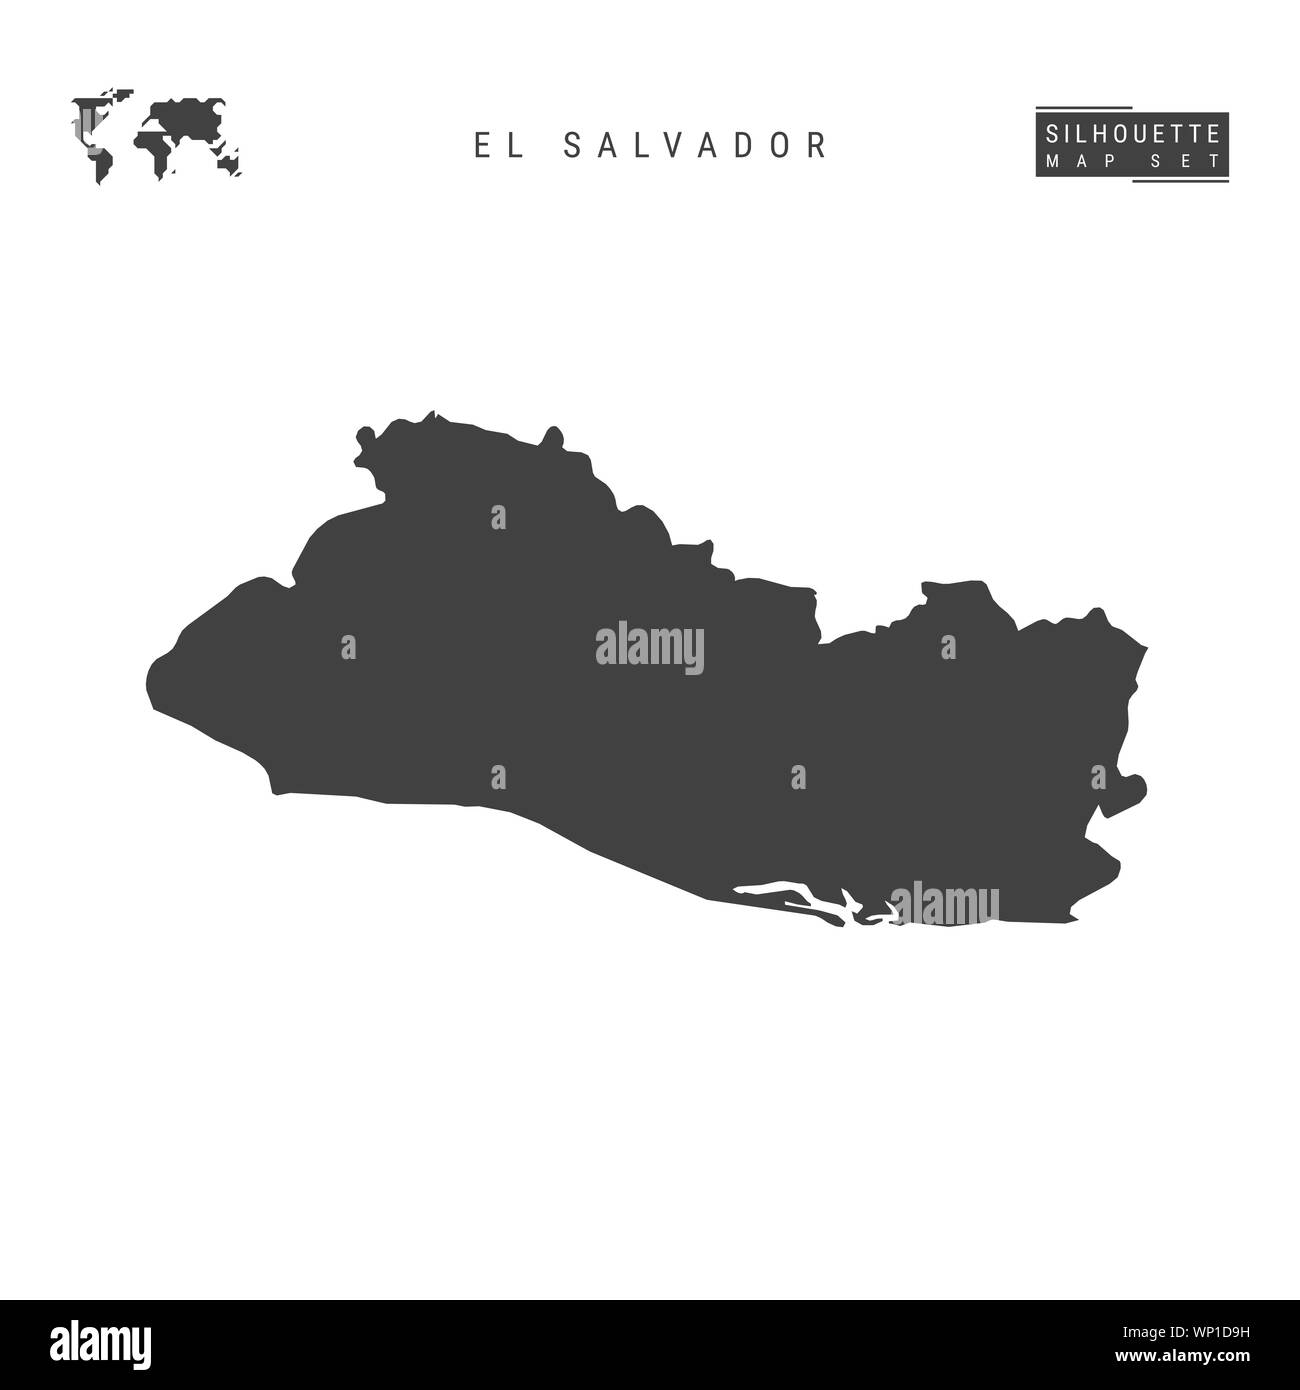 El Salvador Blank Map Isolated on White Background. High-Detailed Black Silhouette Map of El Salvador. Stock Photo